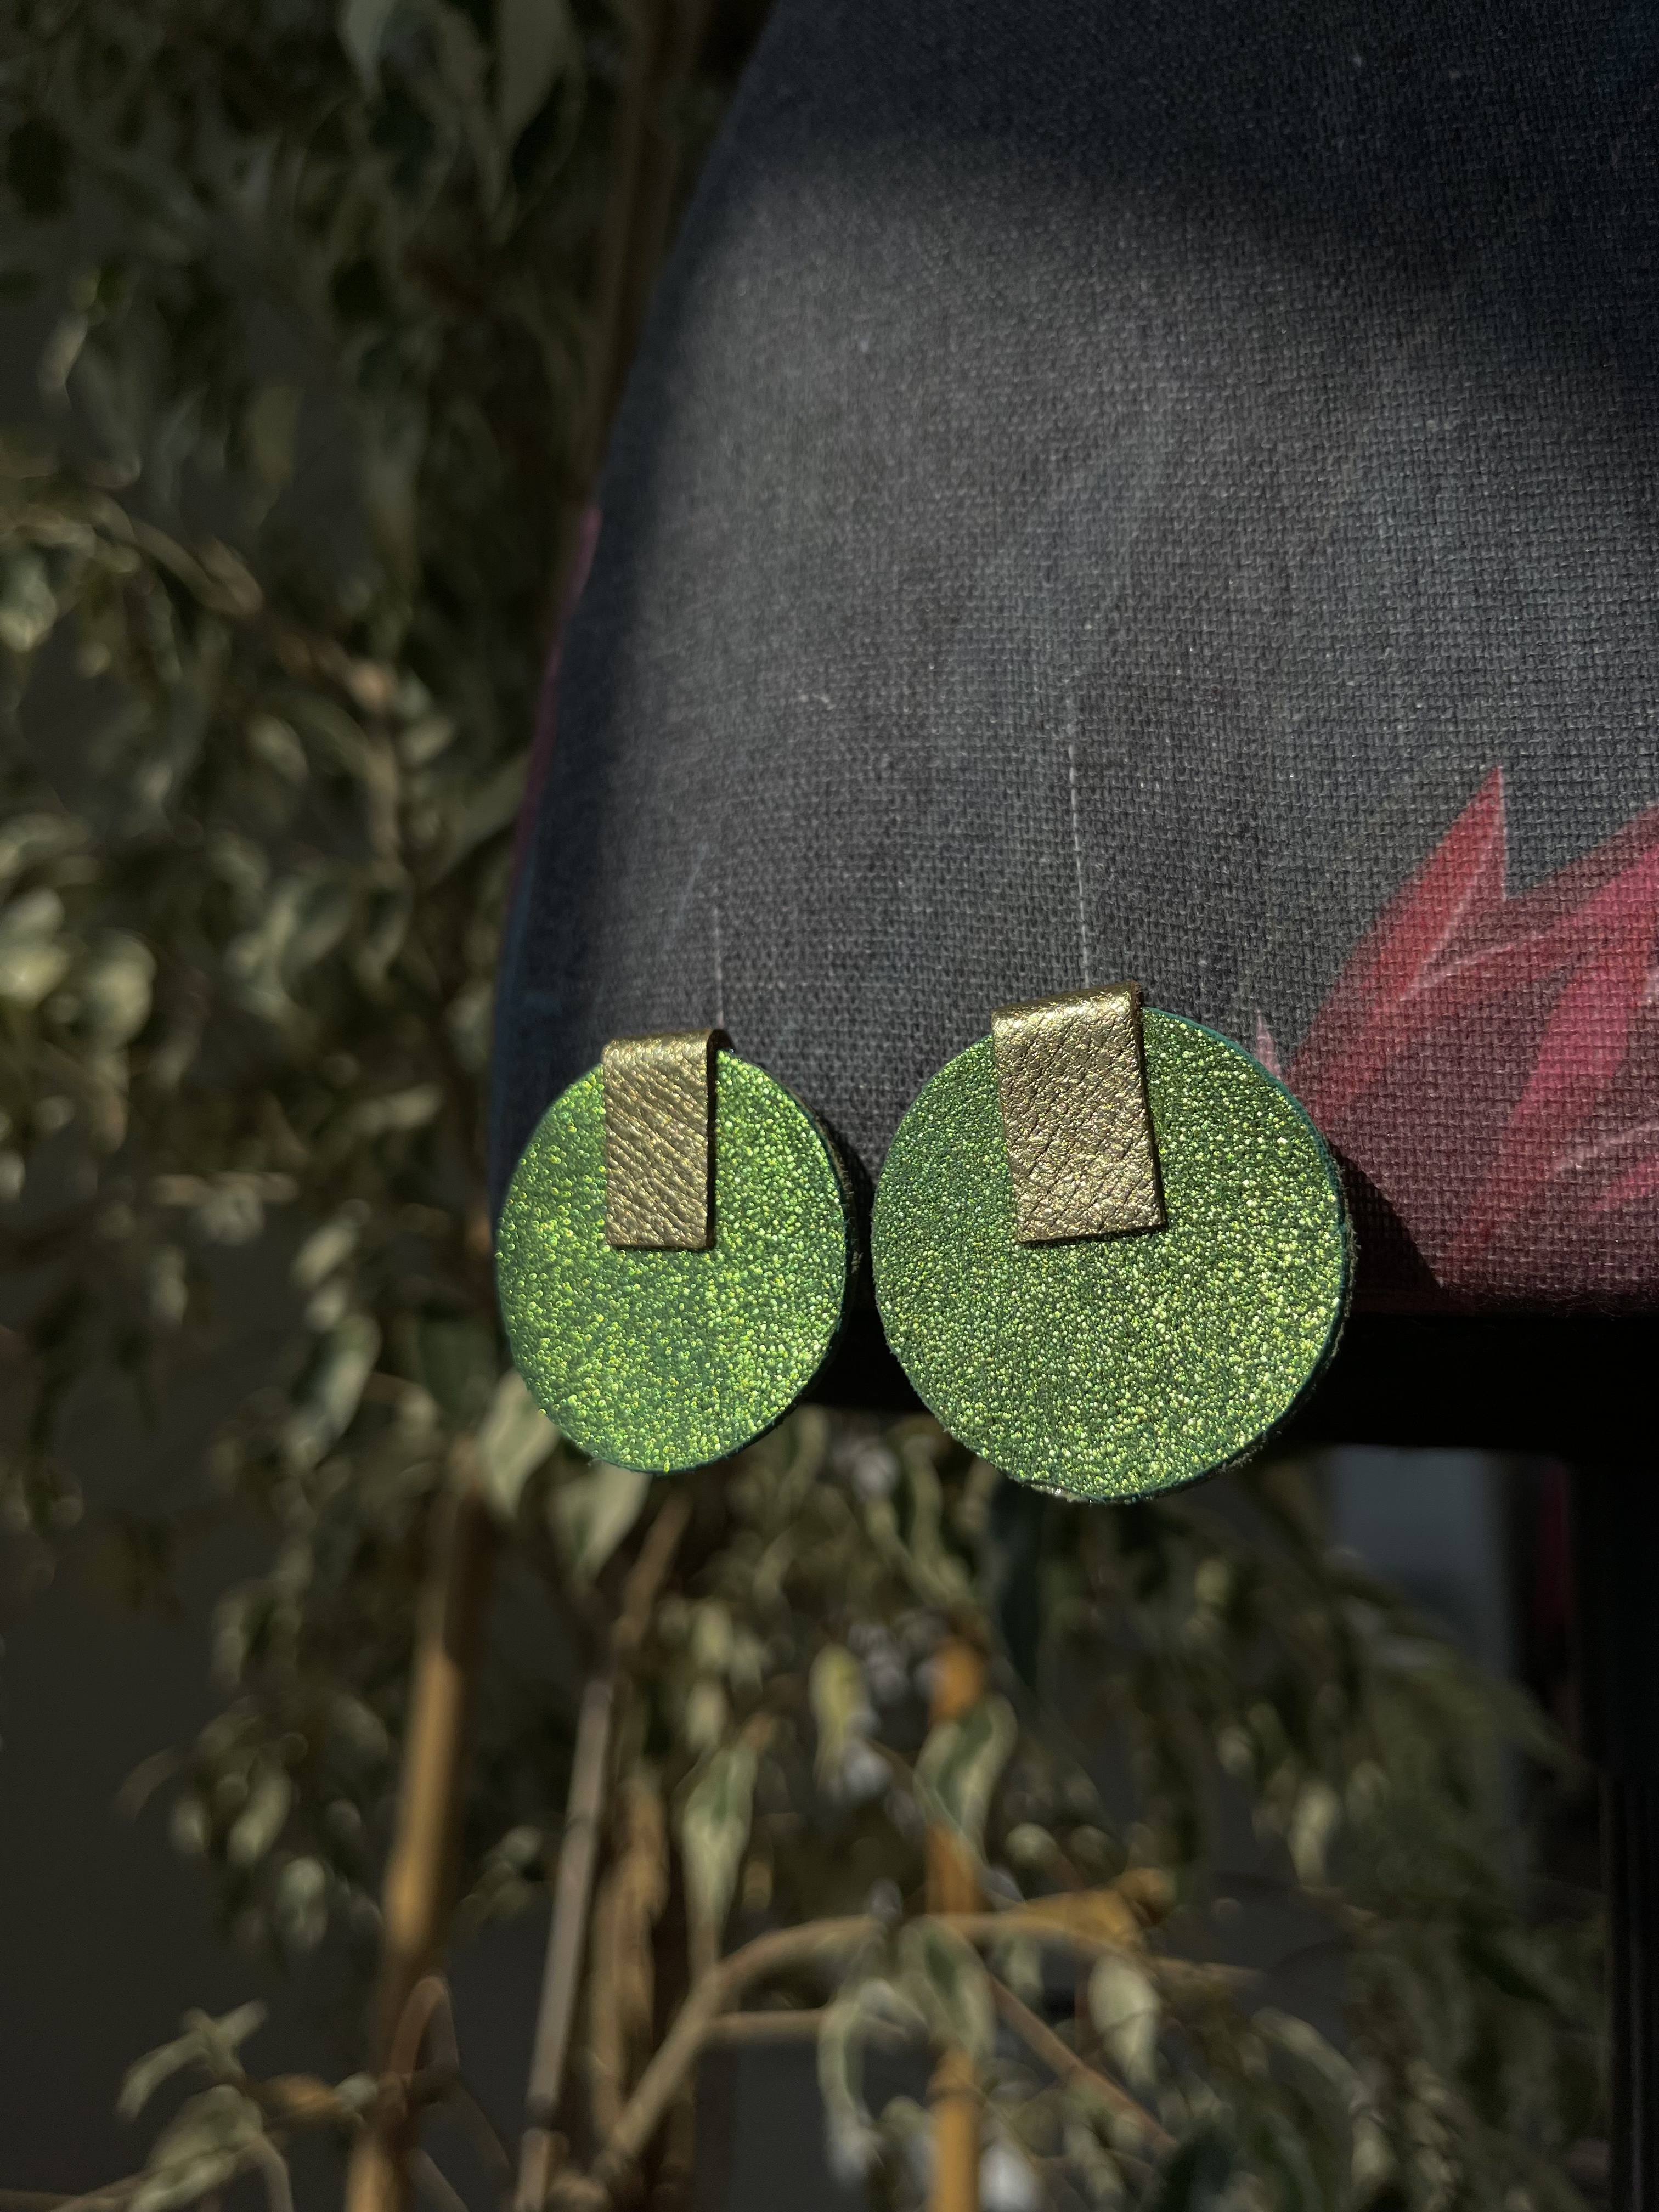 G12 Iridescent Green Leather Earrings   